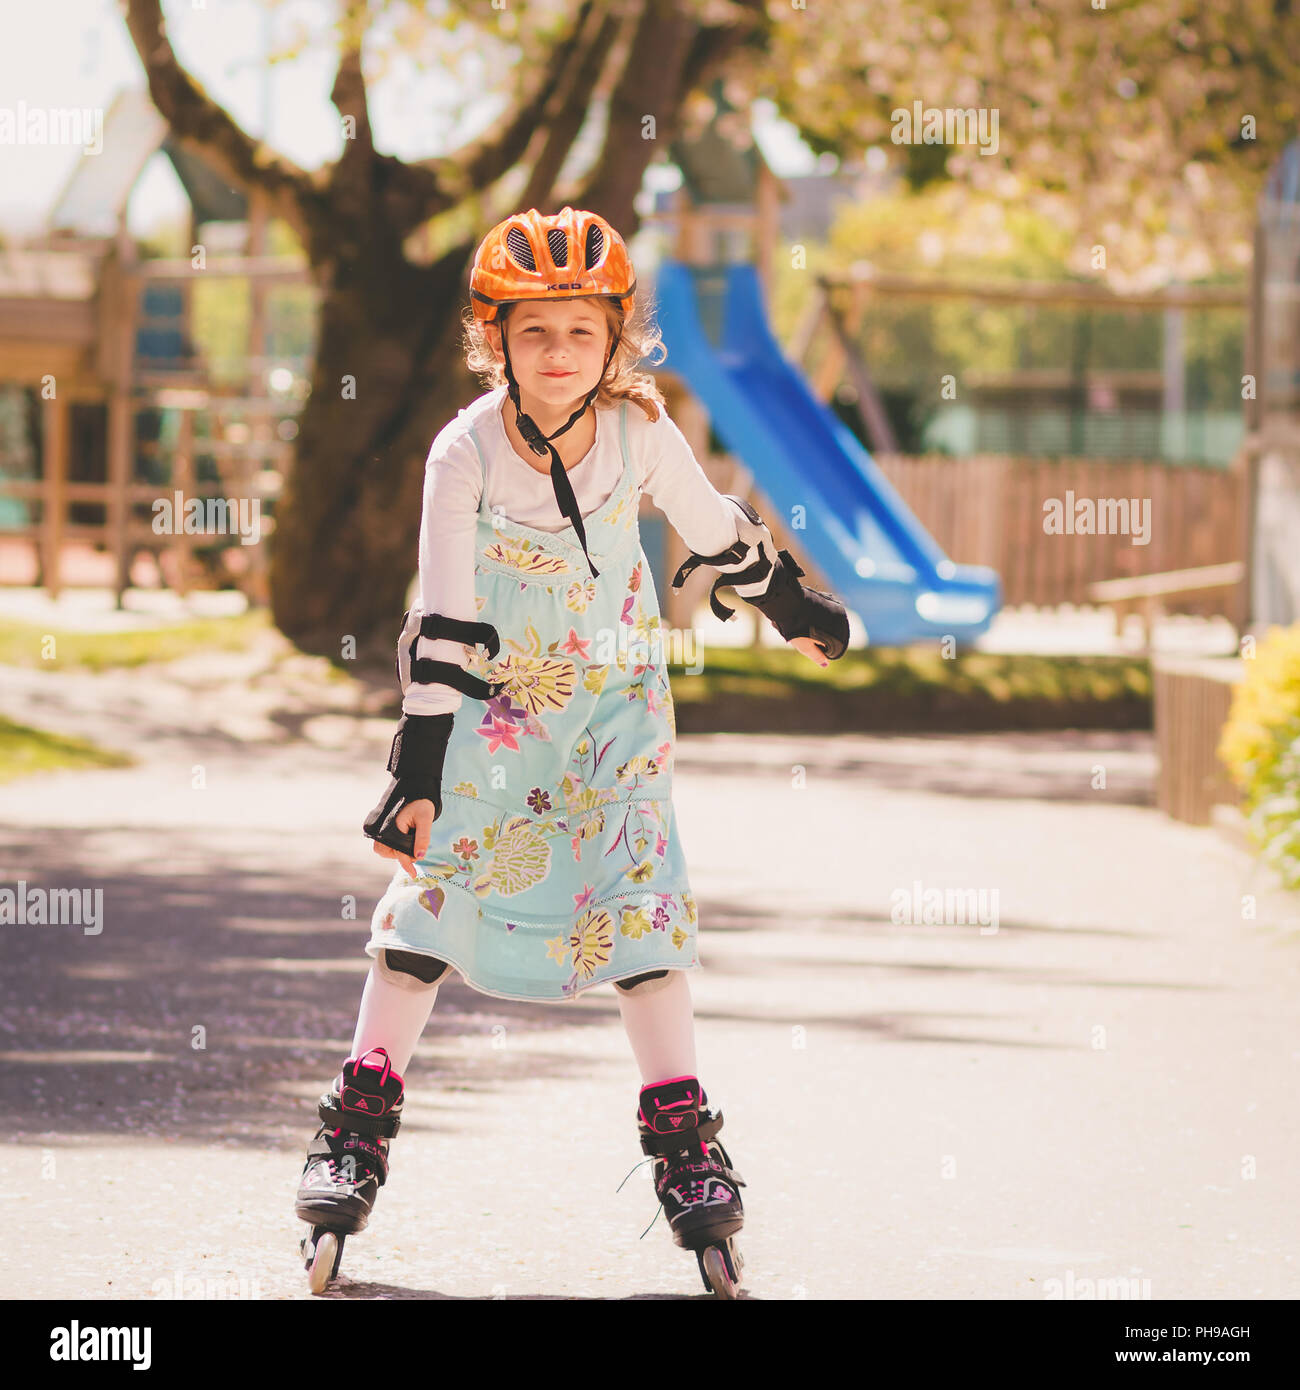 Young girl learning skating with inline skates Stock Photo